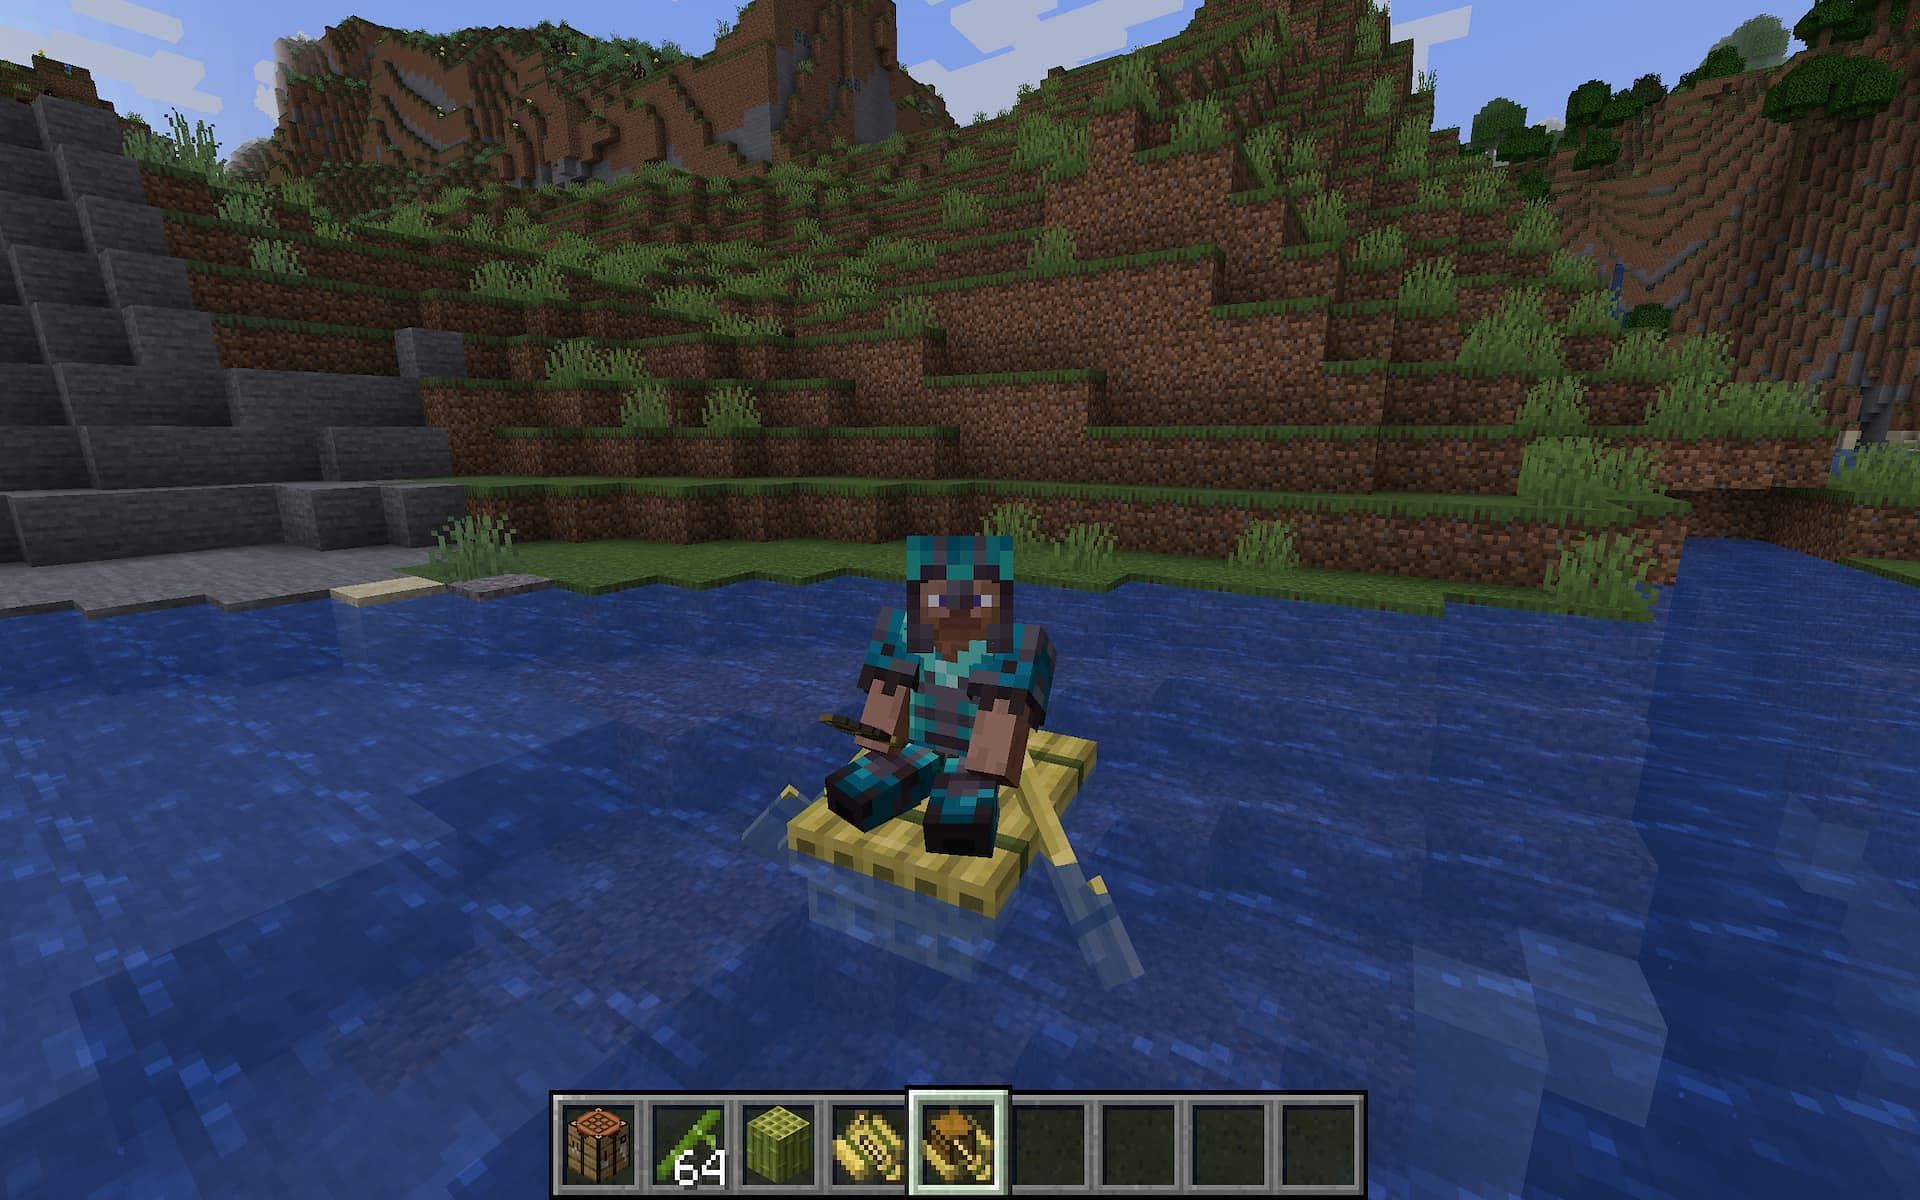 Players can create a raft to explore the waterways in game (Image via Mojang)